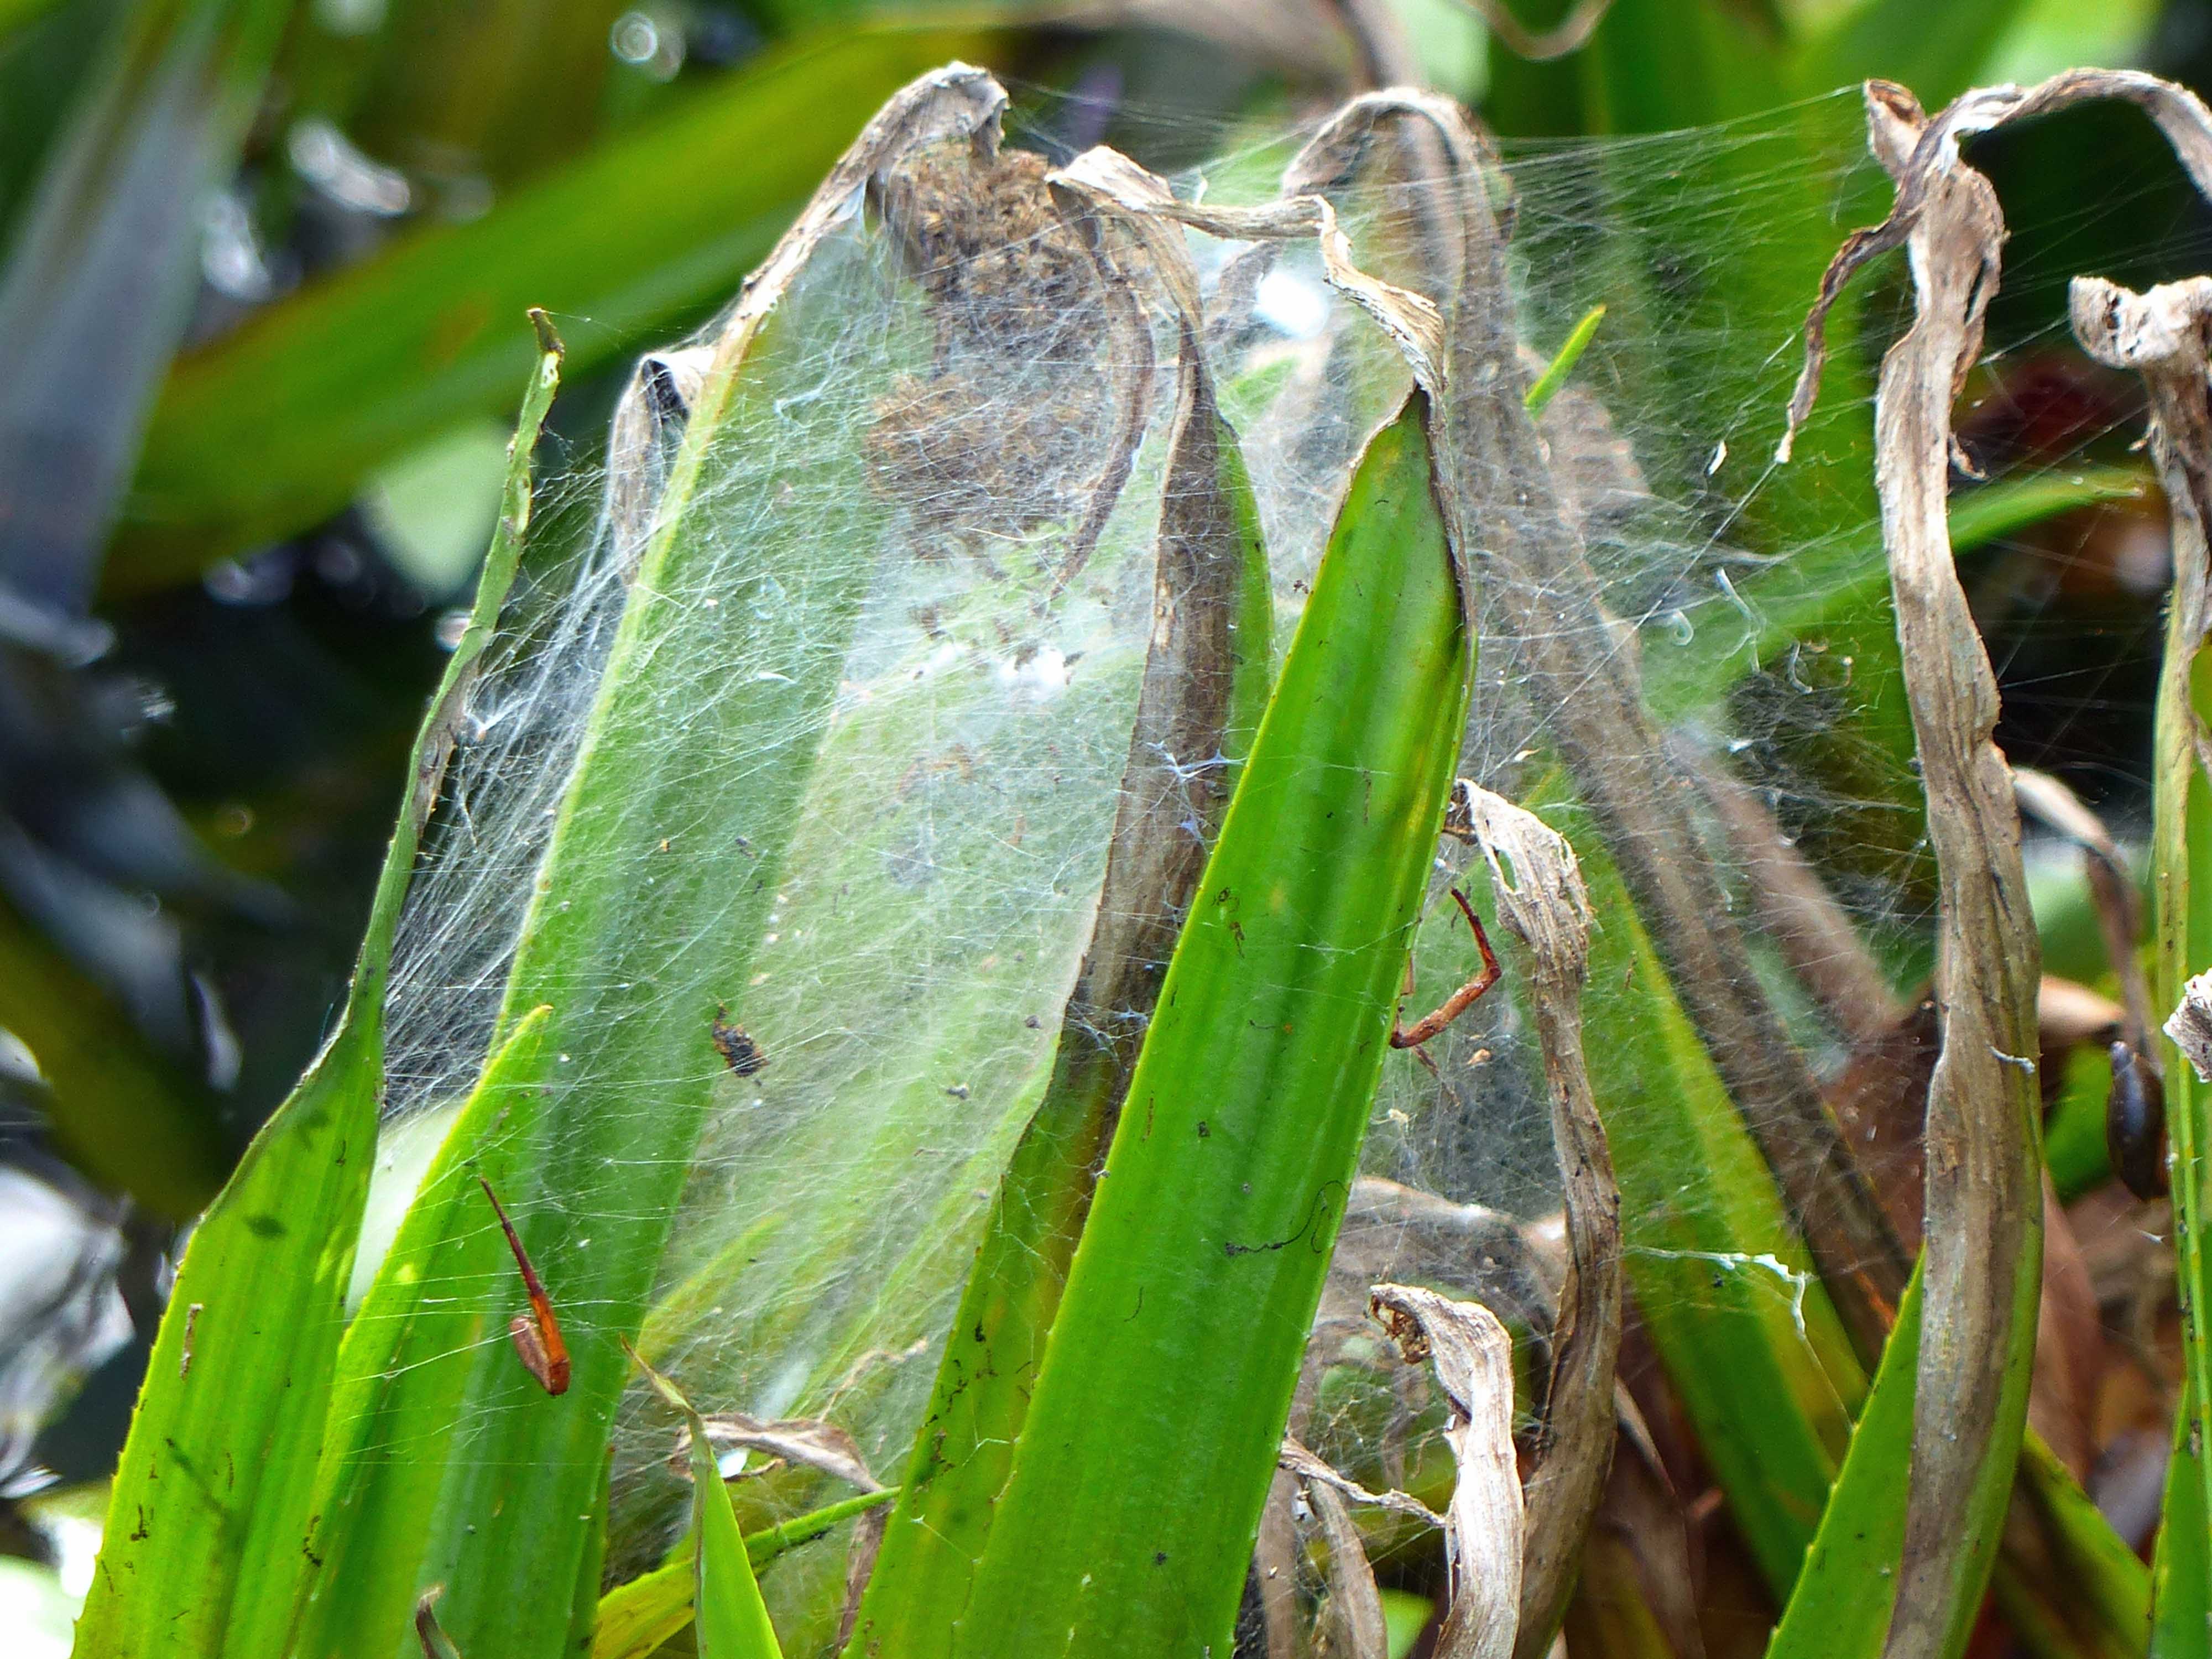 Dolomedes plantarius nursery with spiderlings but only the mother's legs remaining